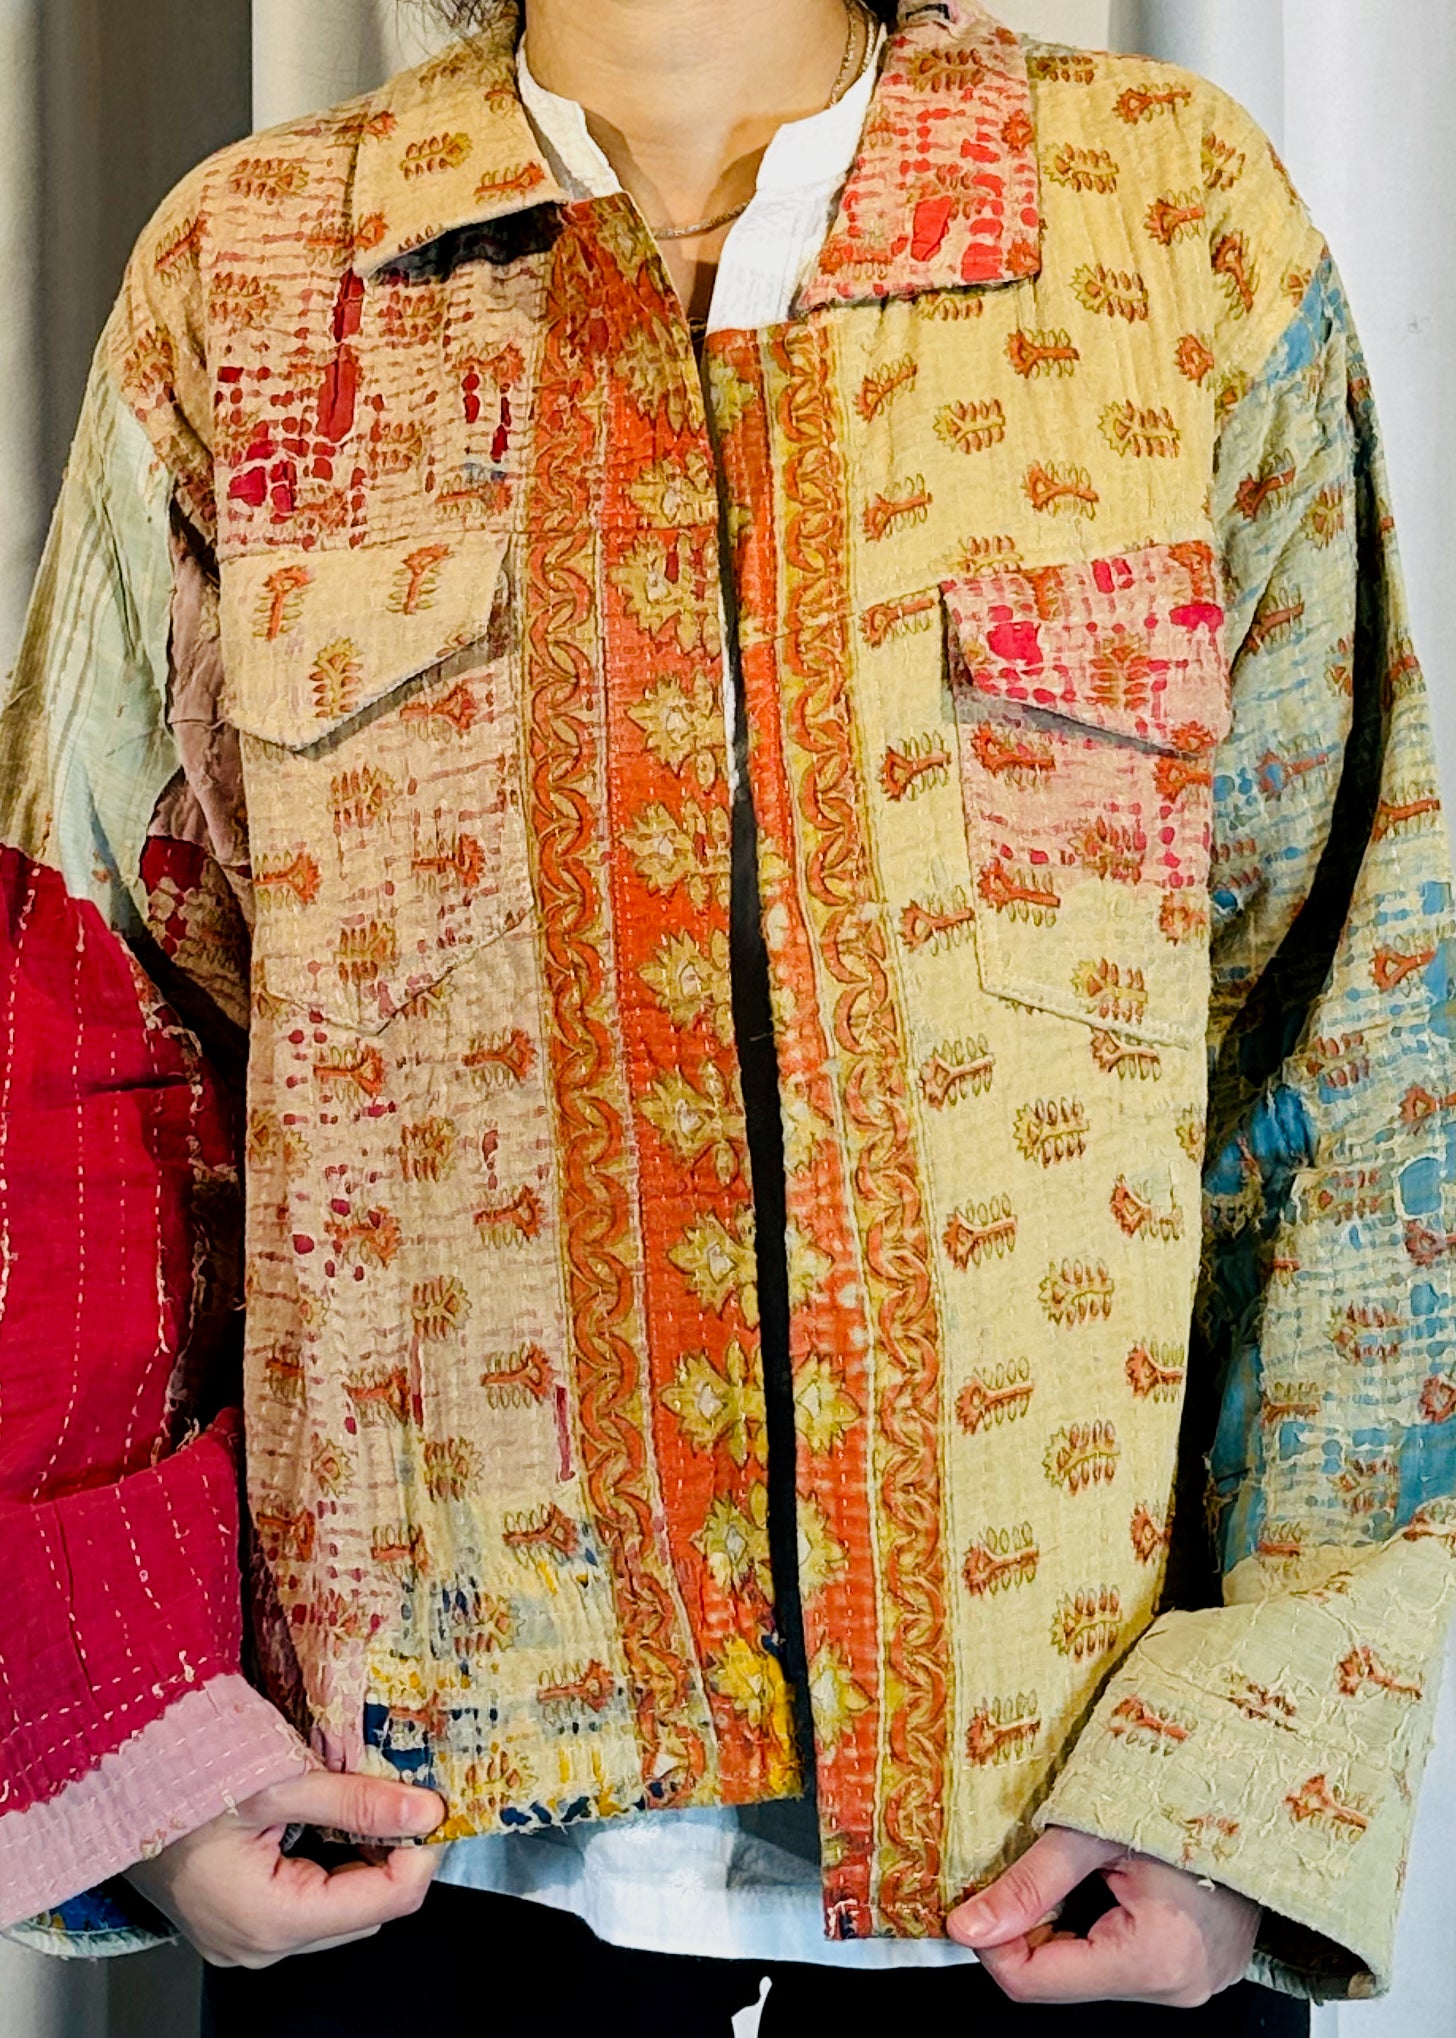 Sustainably Crafted Unique Quilted Trucker Jacket in Vibrant Orange and Red from Recycled Saris - DharBazaar